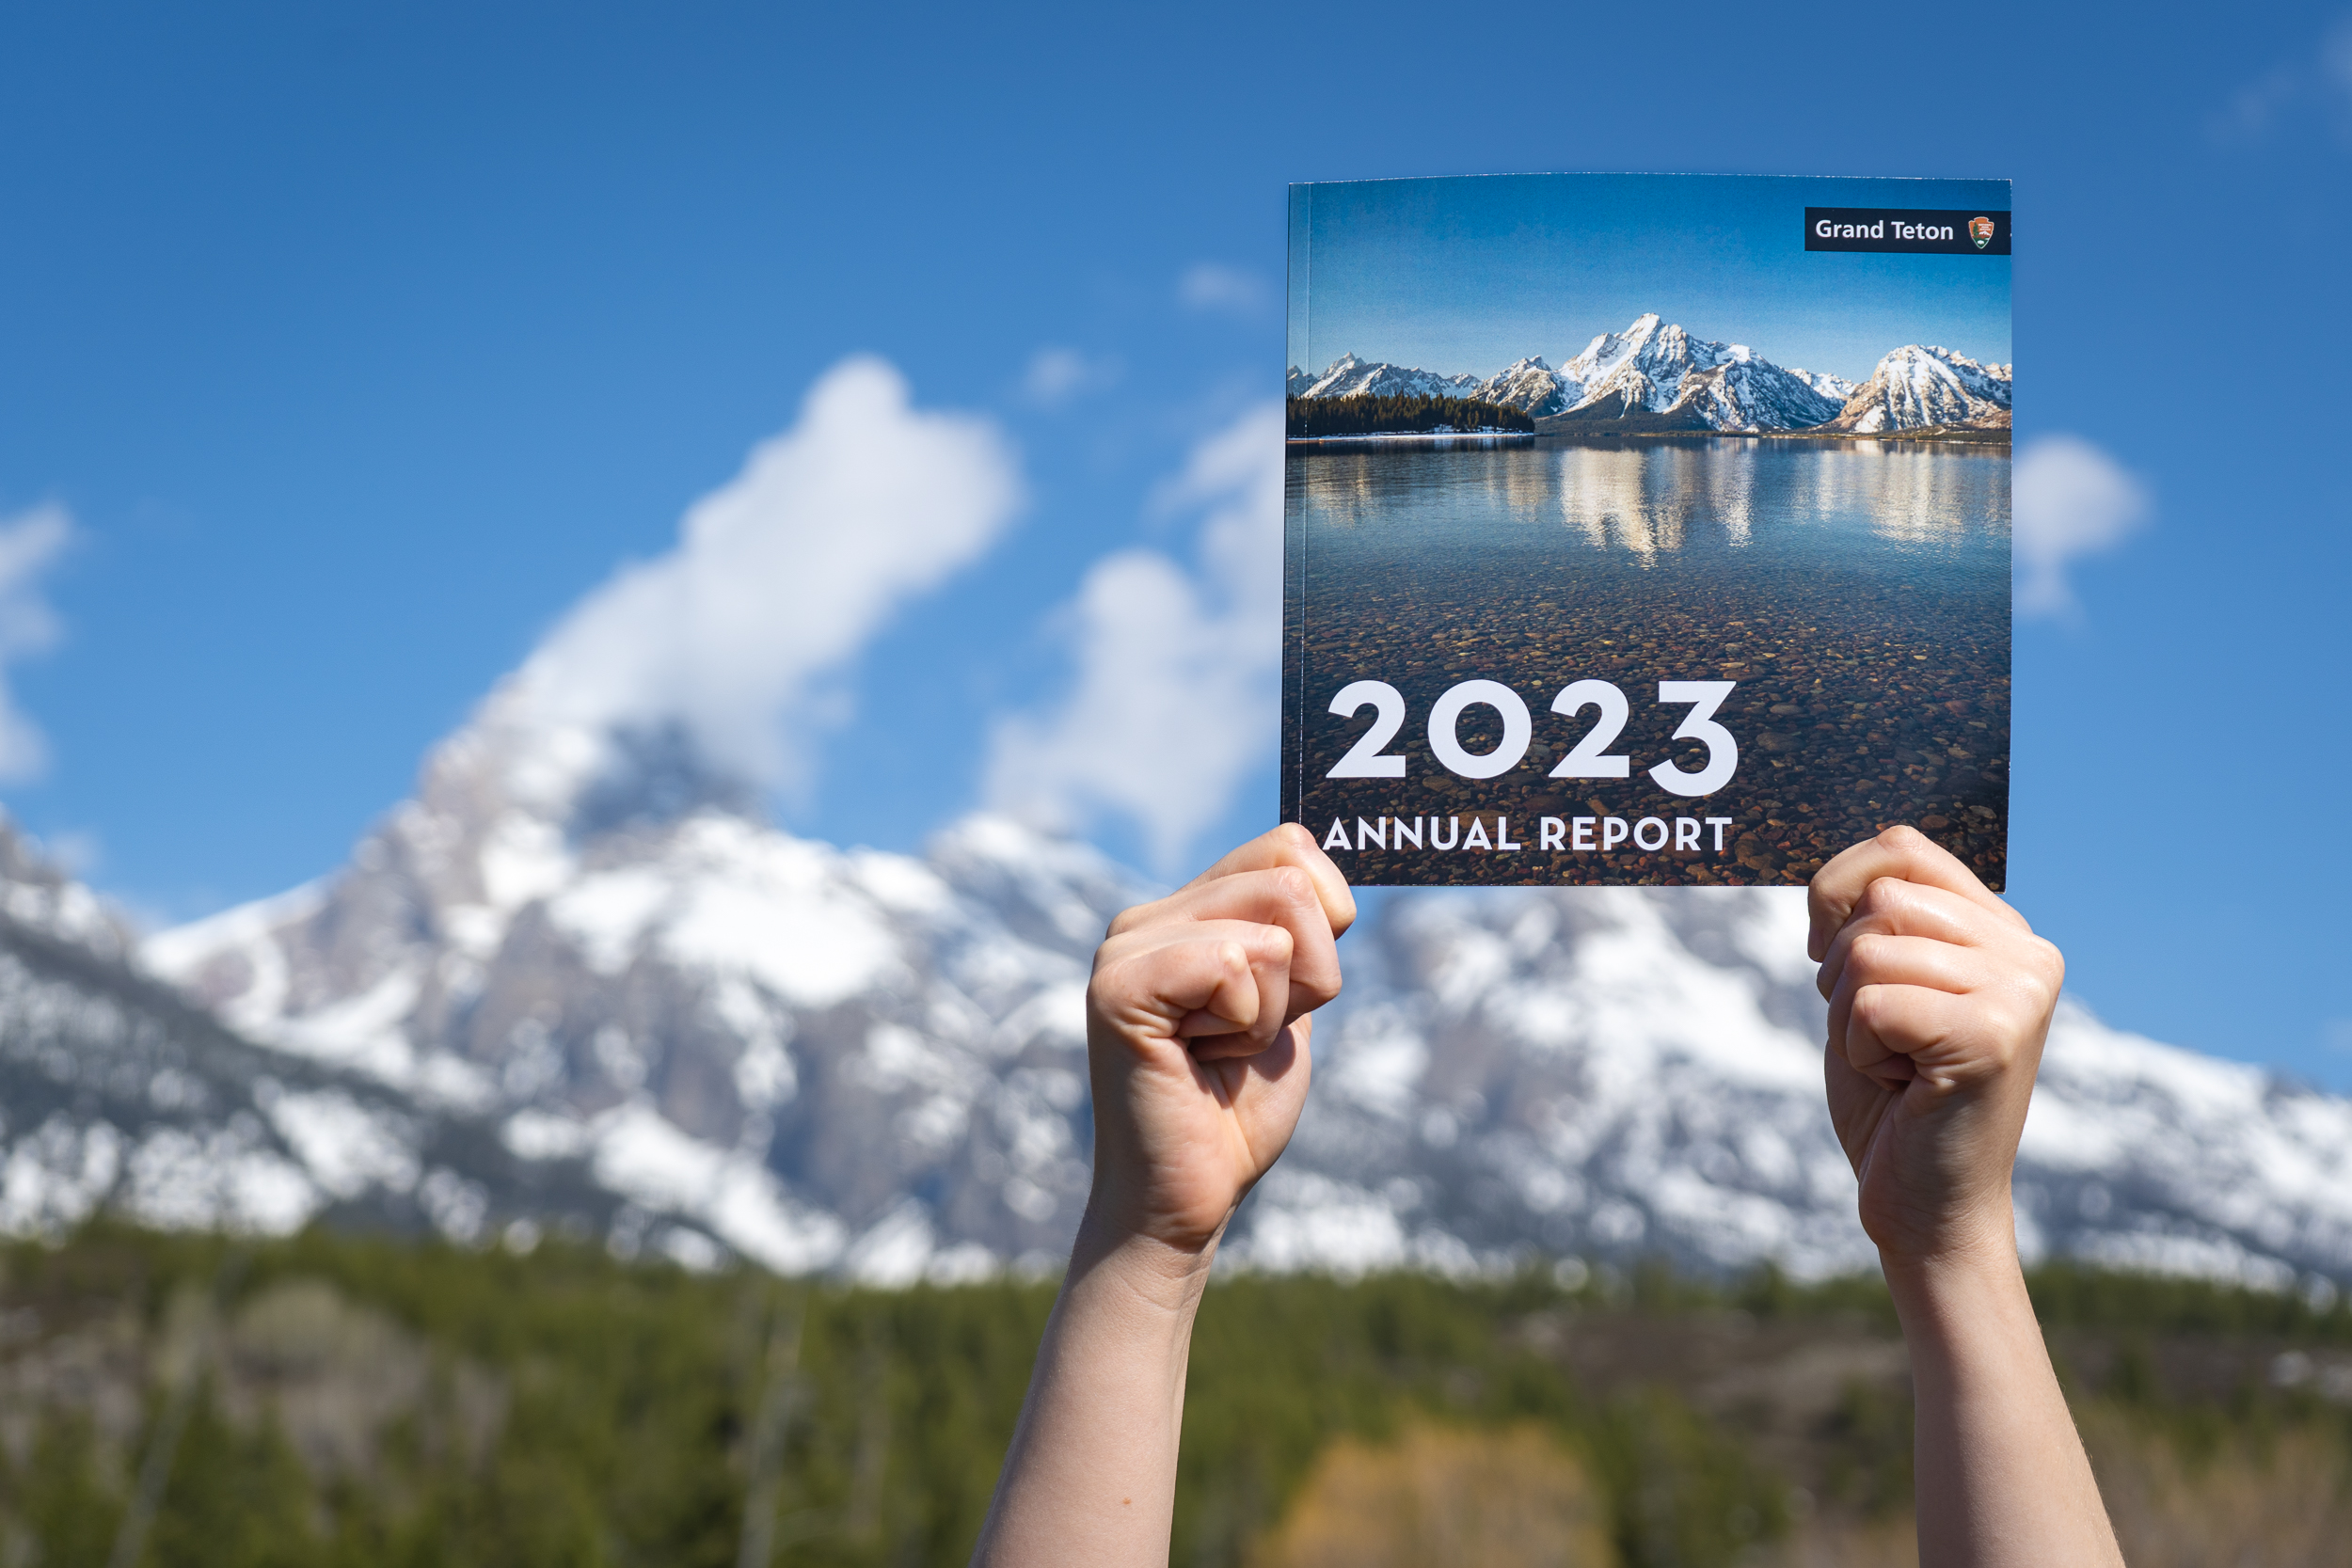 Hands holding the Grand Teton 2023 Annual report in front of the Teton Range and blue skies above.